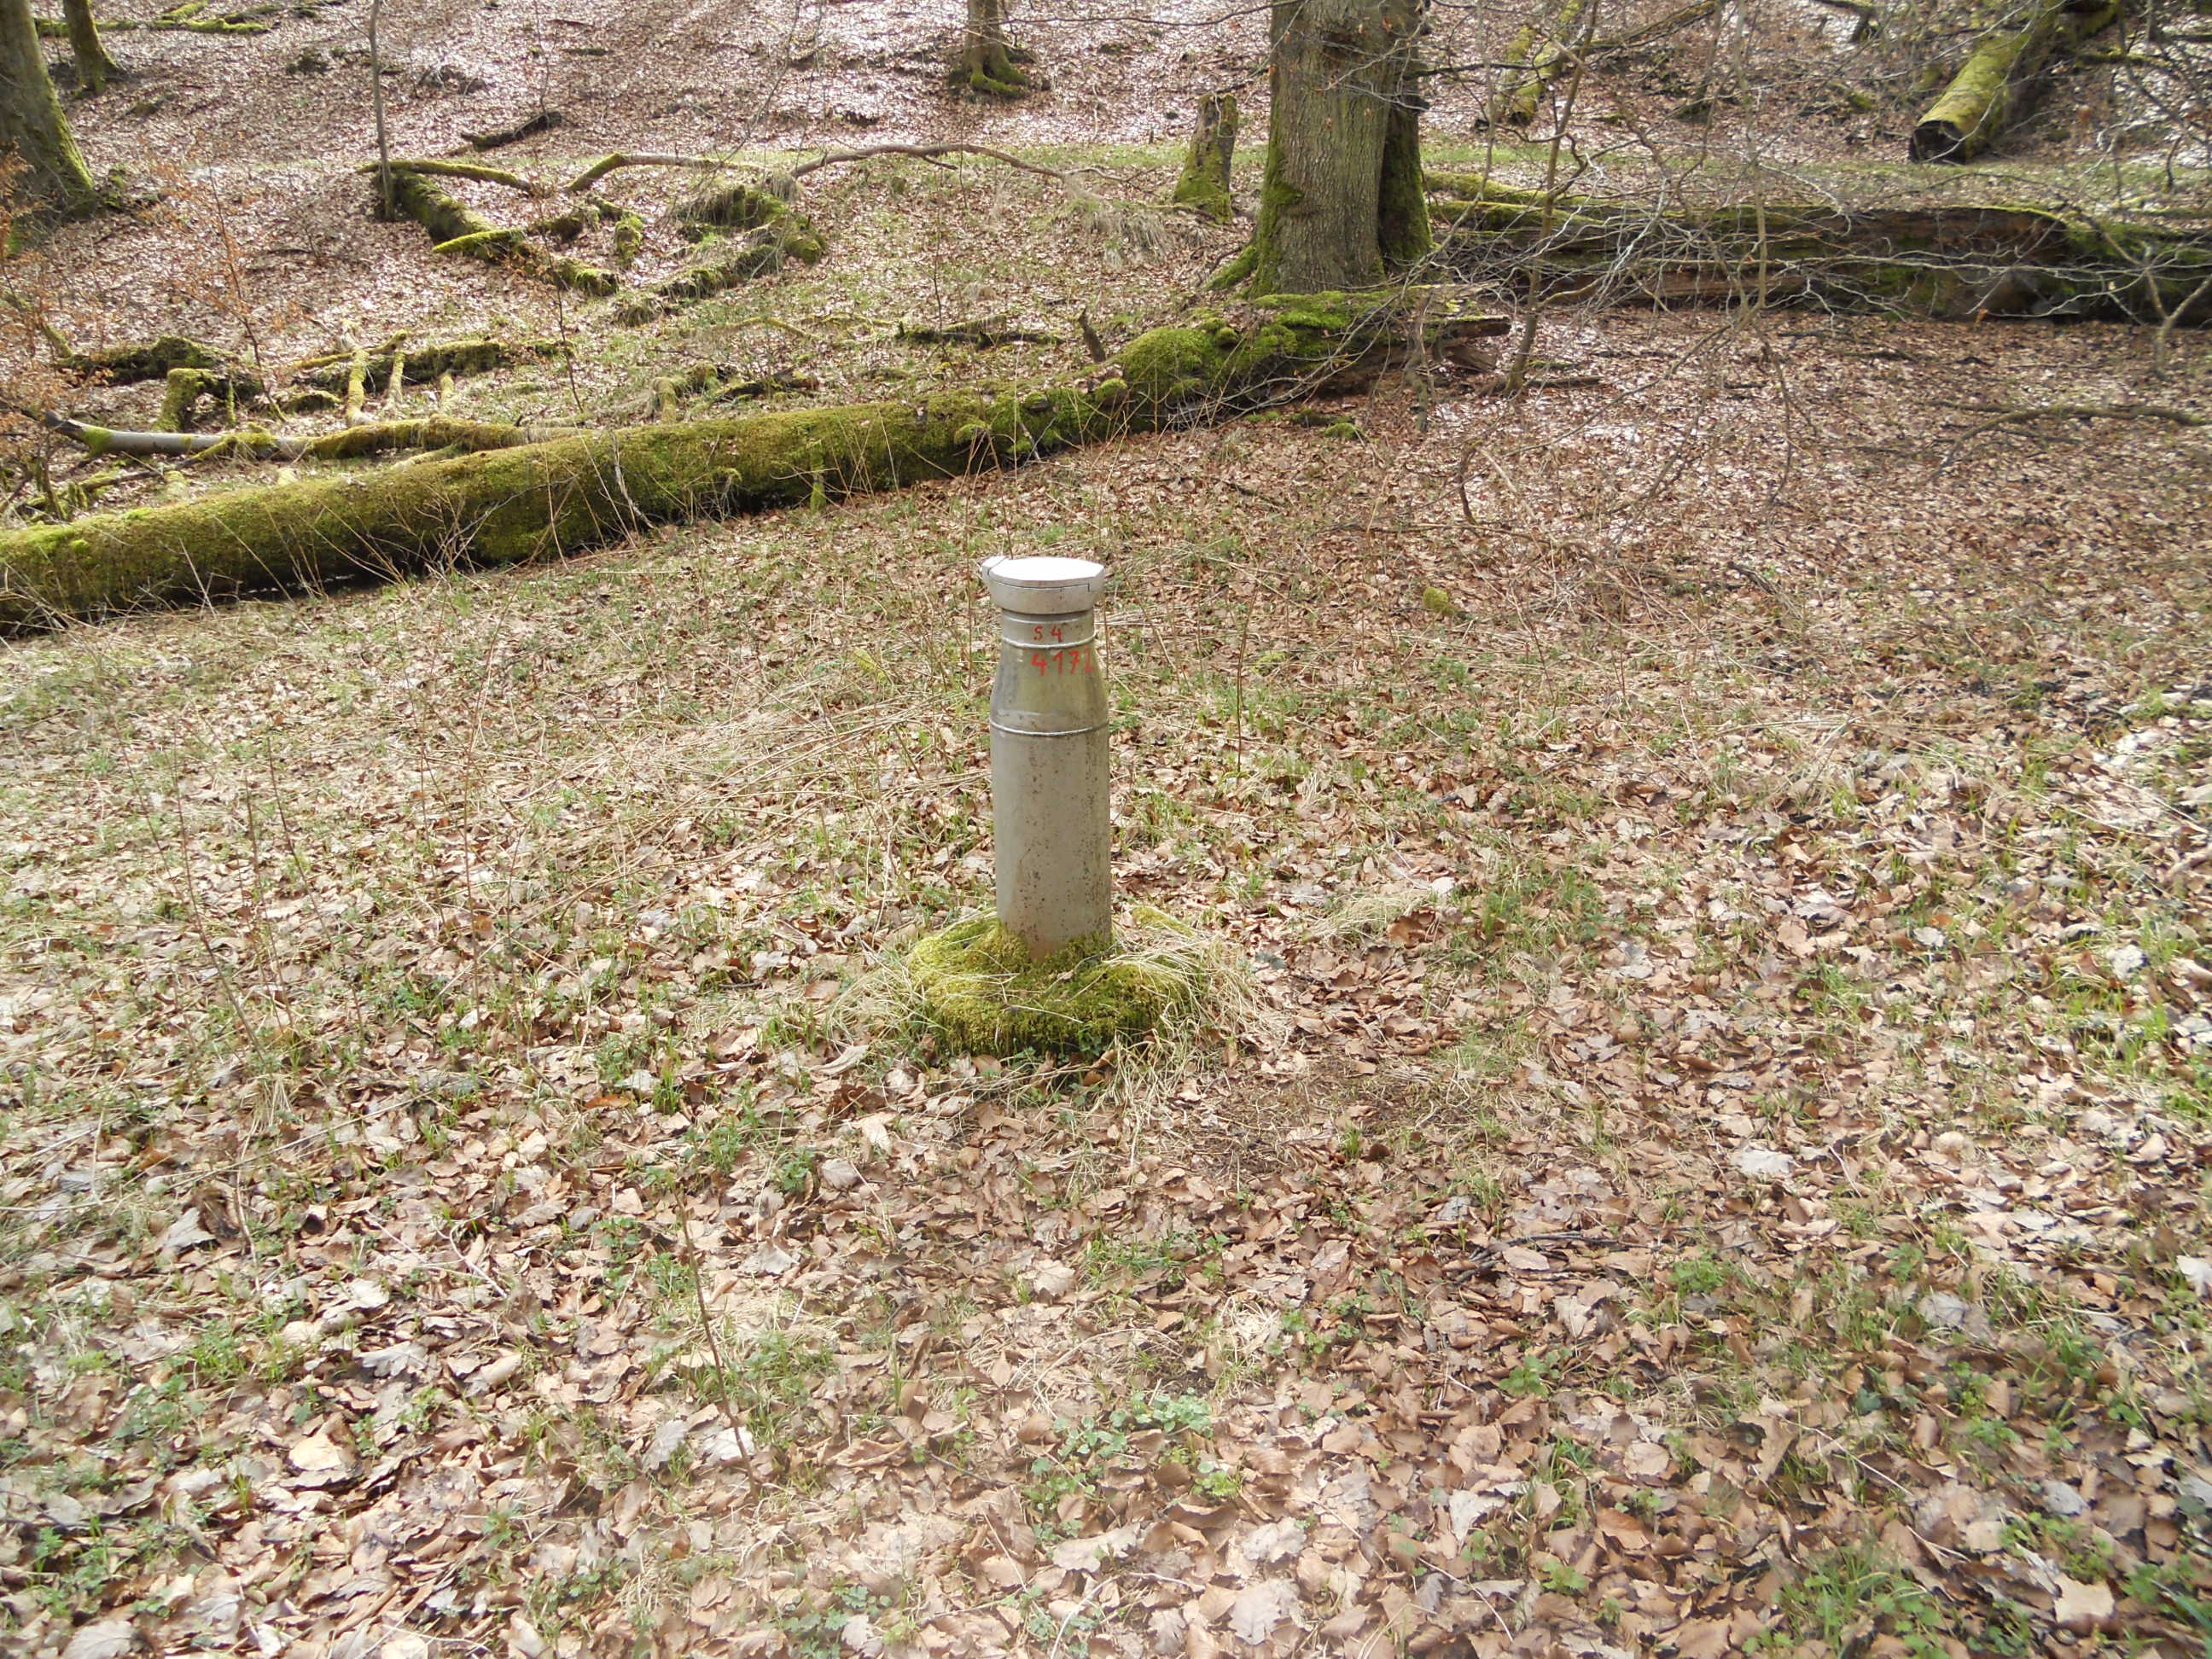 Picture of the measurement site